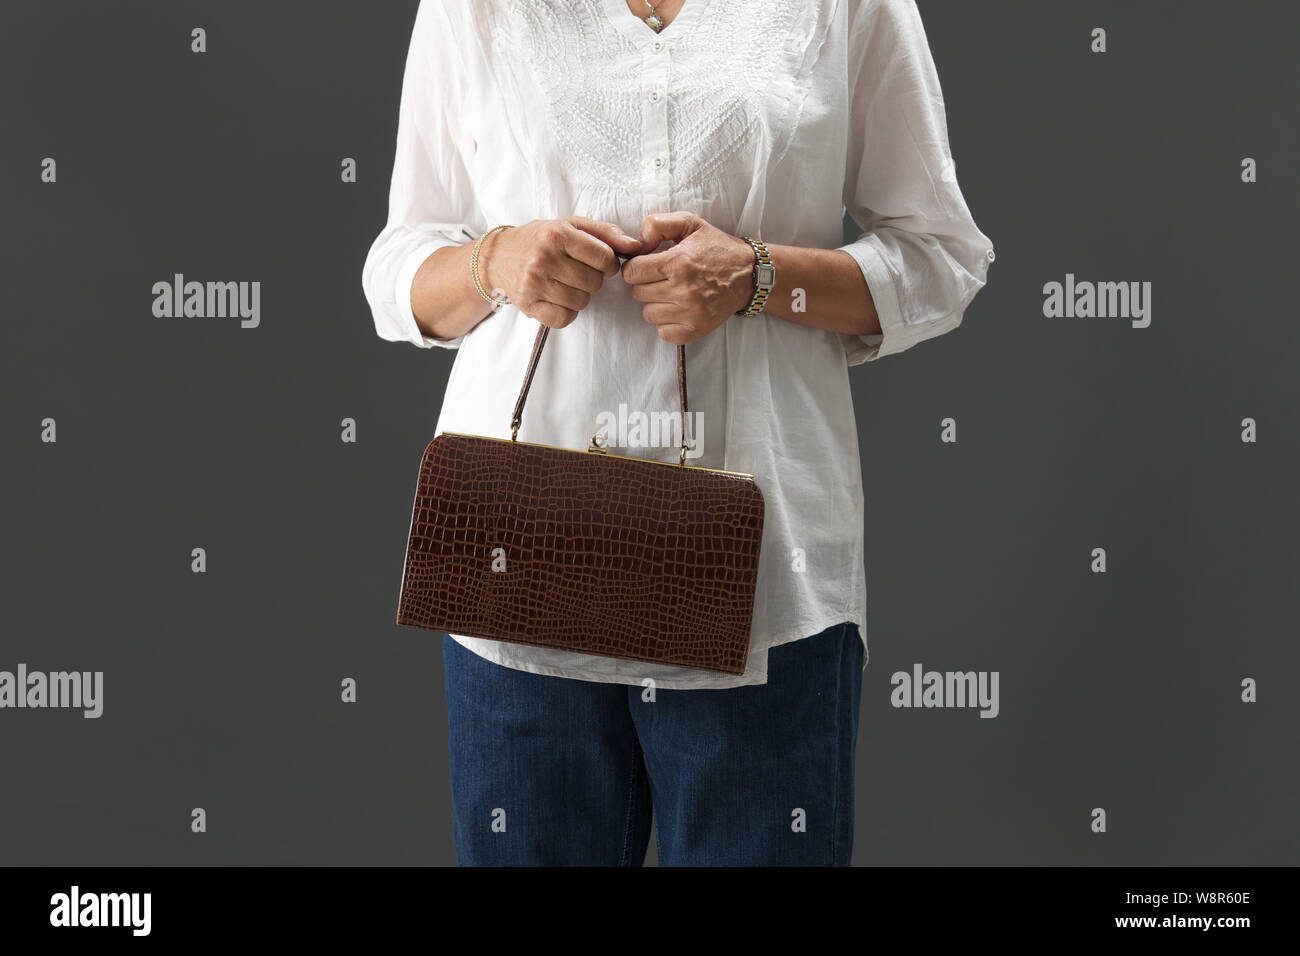 Midsection view of a old woman holding handbag Stock Photo